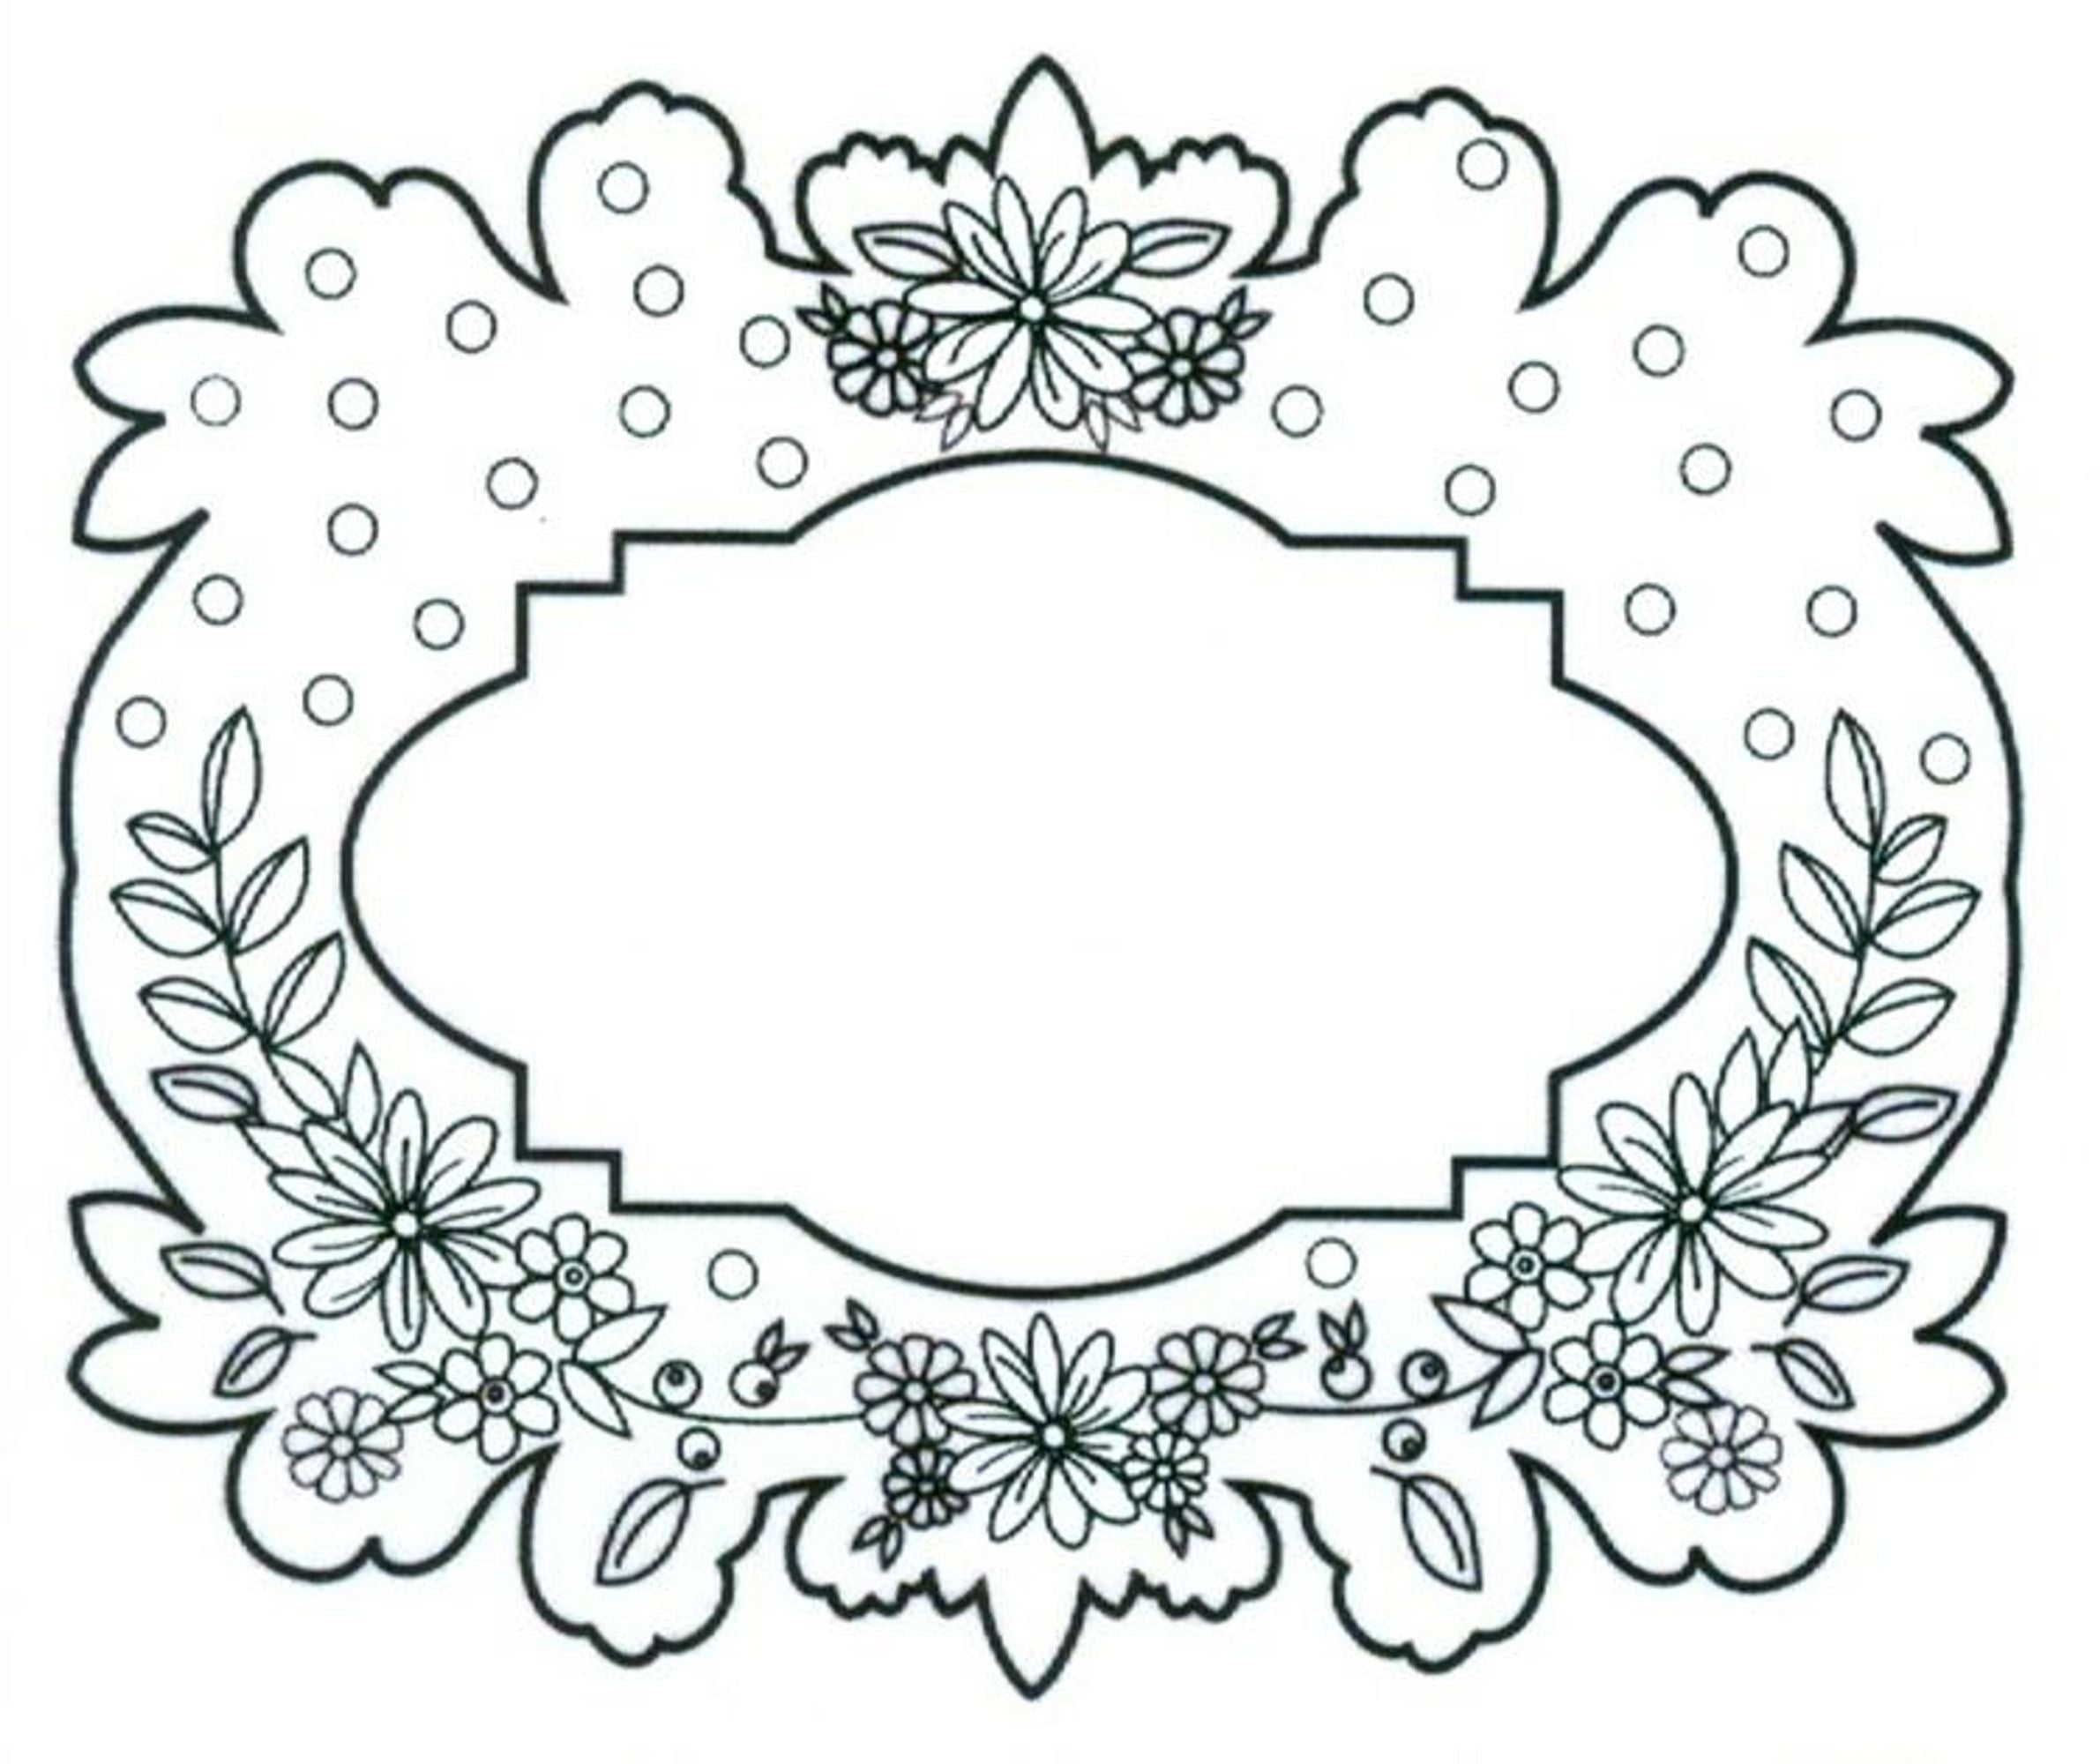 CE Foam Stamps - Floral Garland